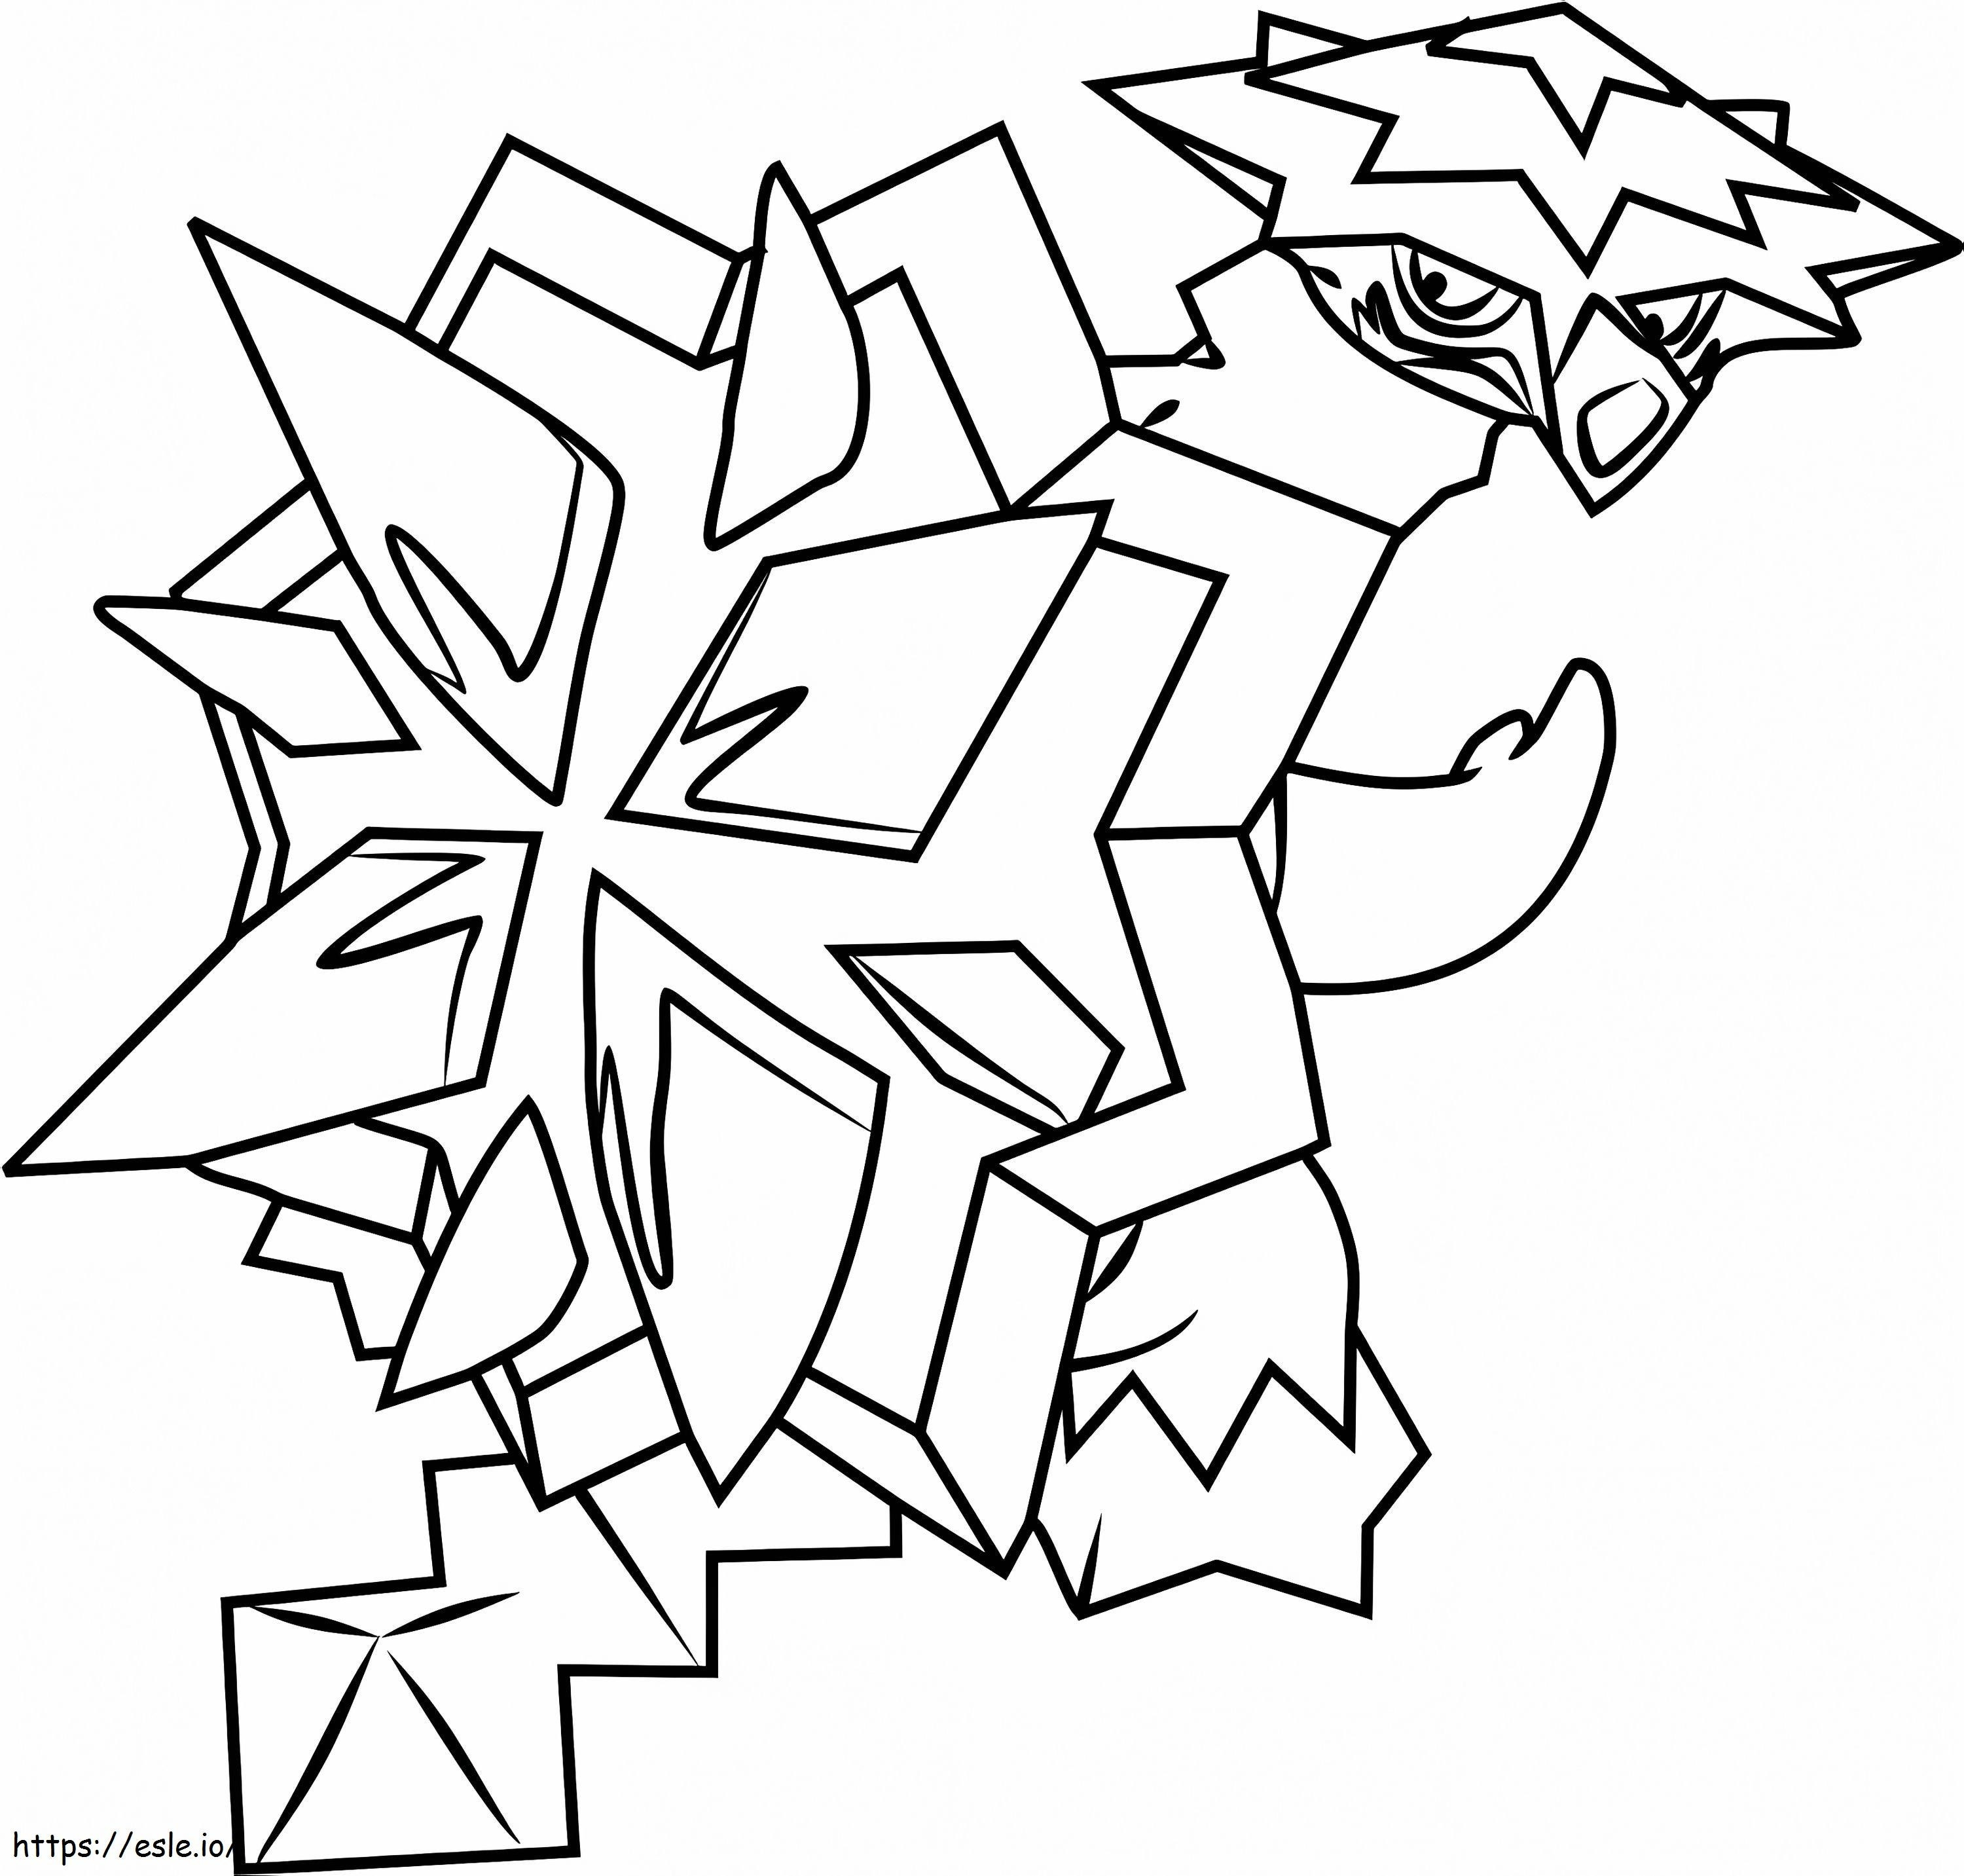 18 coloring page